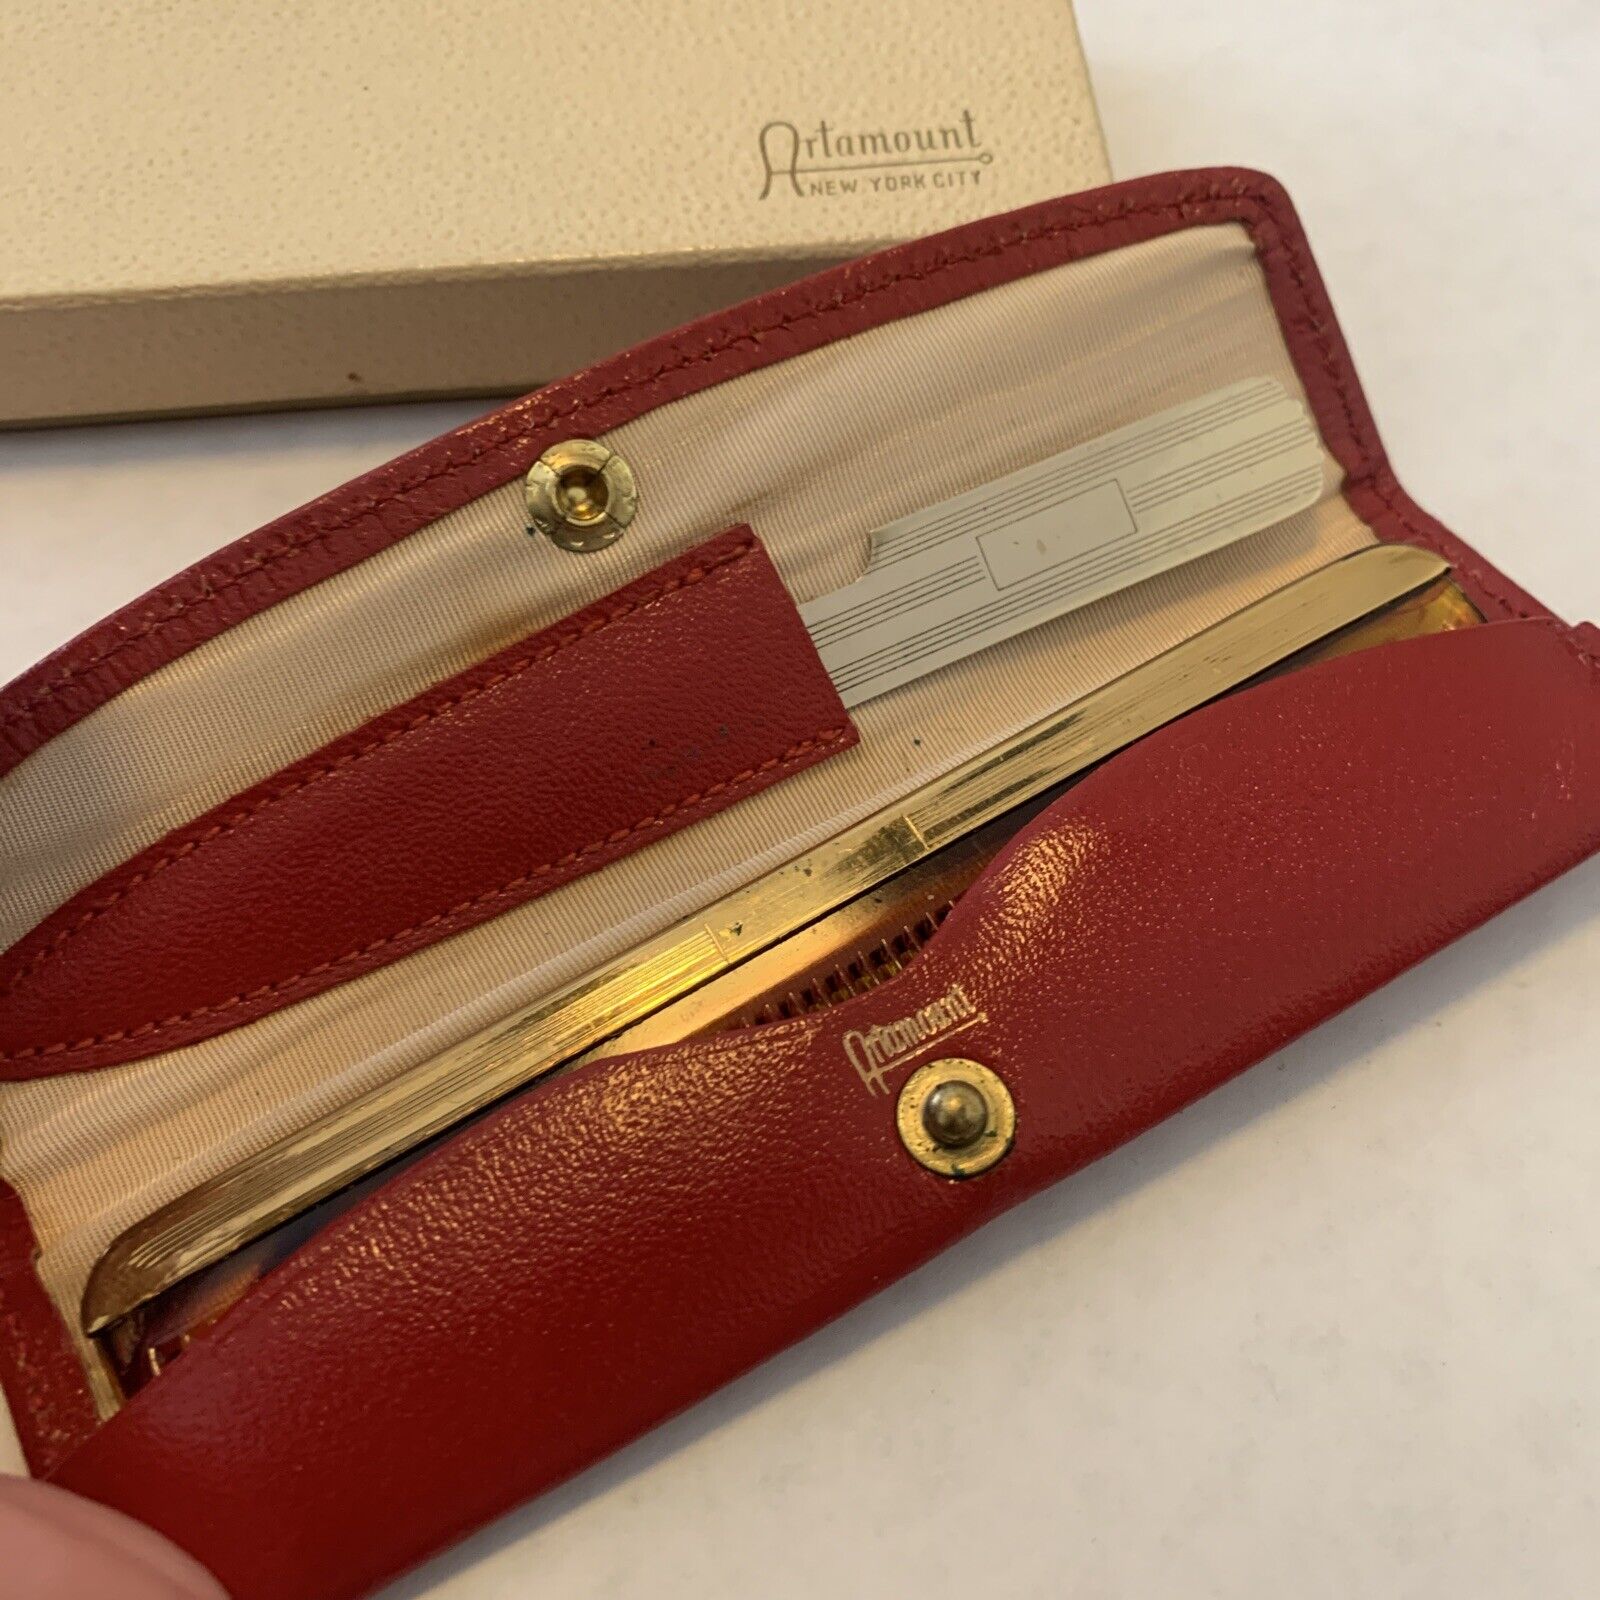 Artamount Vintage Case With Comb Nail File In Red Case In Box